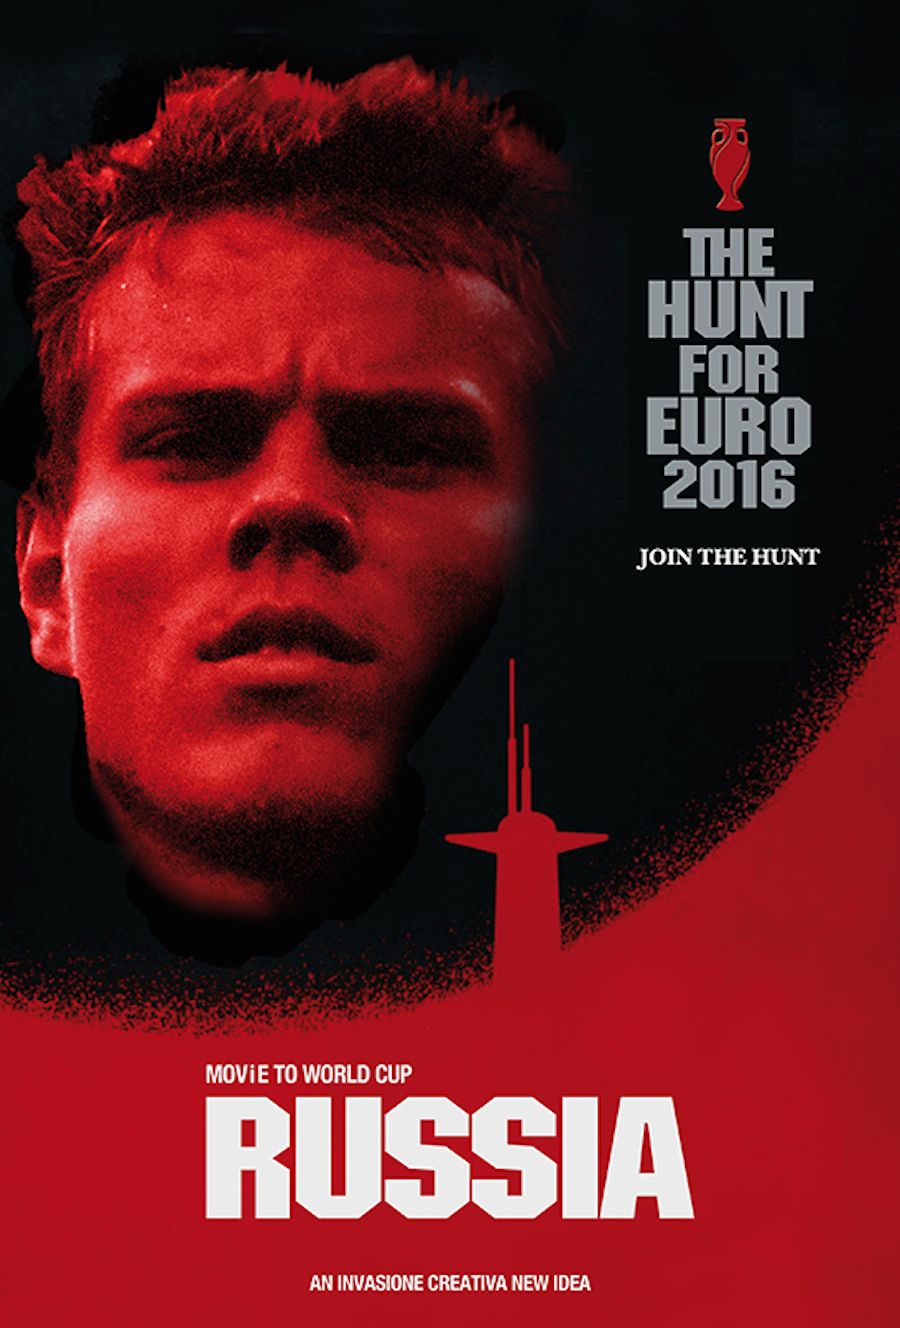 Movie Posters Revisited with Euro 2016 Teams4